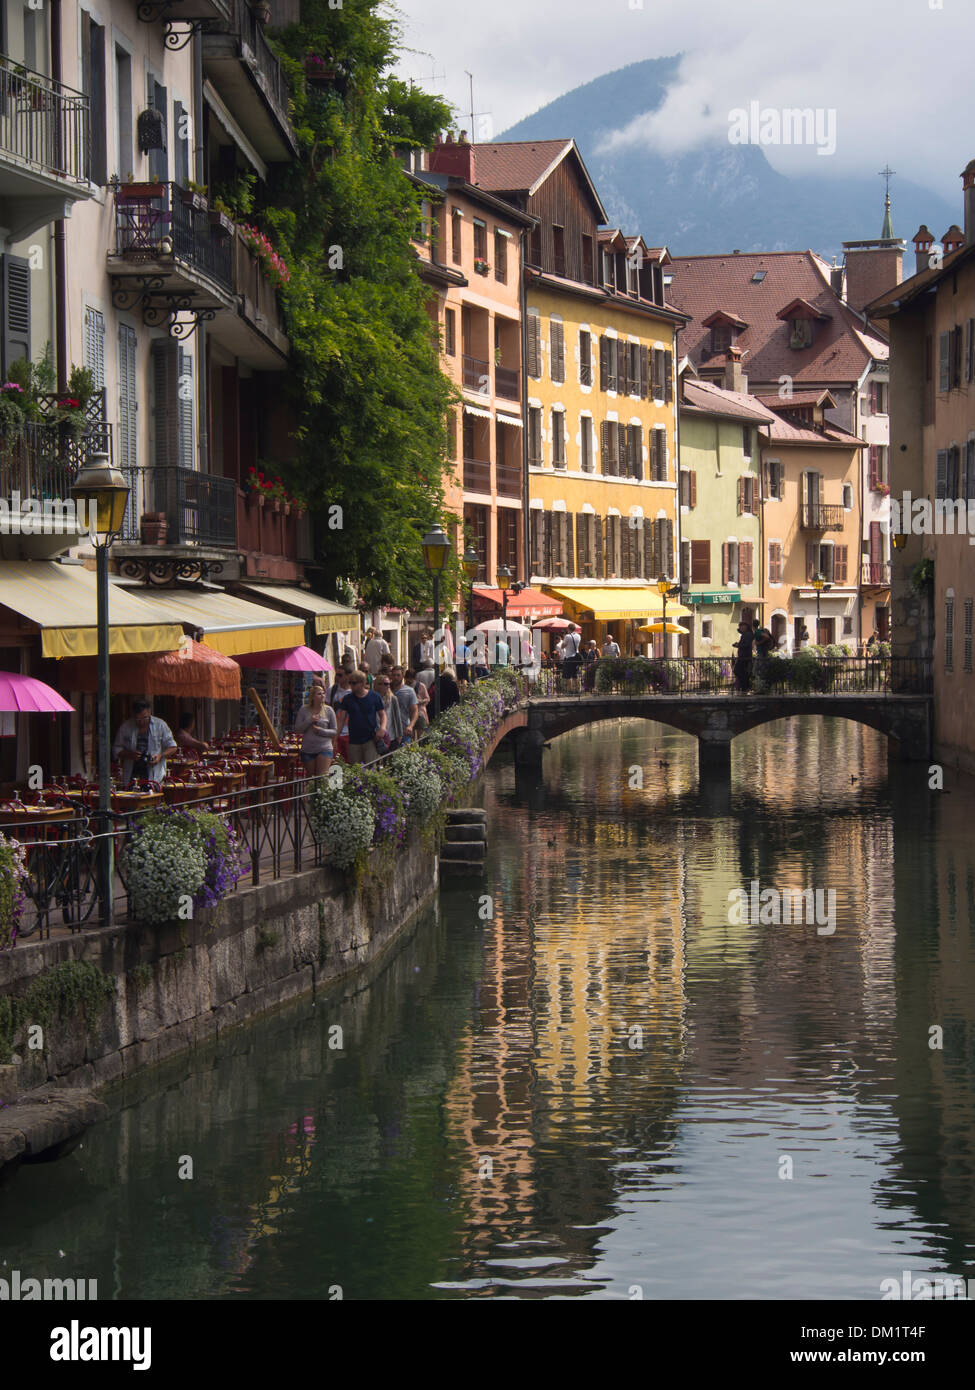 The old town in Annecy France, a mixture of old picturesque houses ...